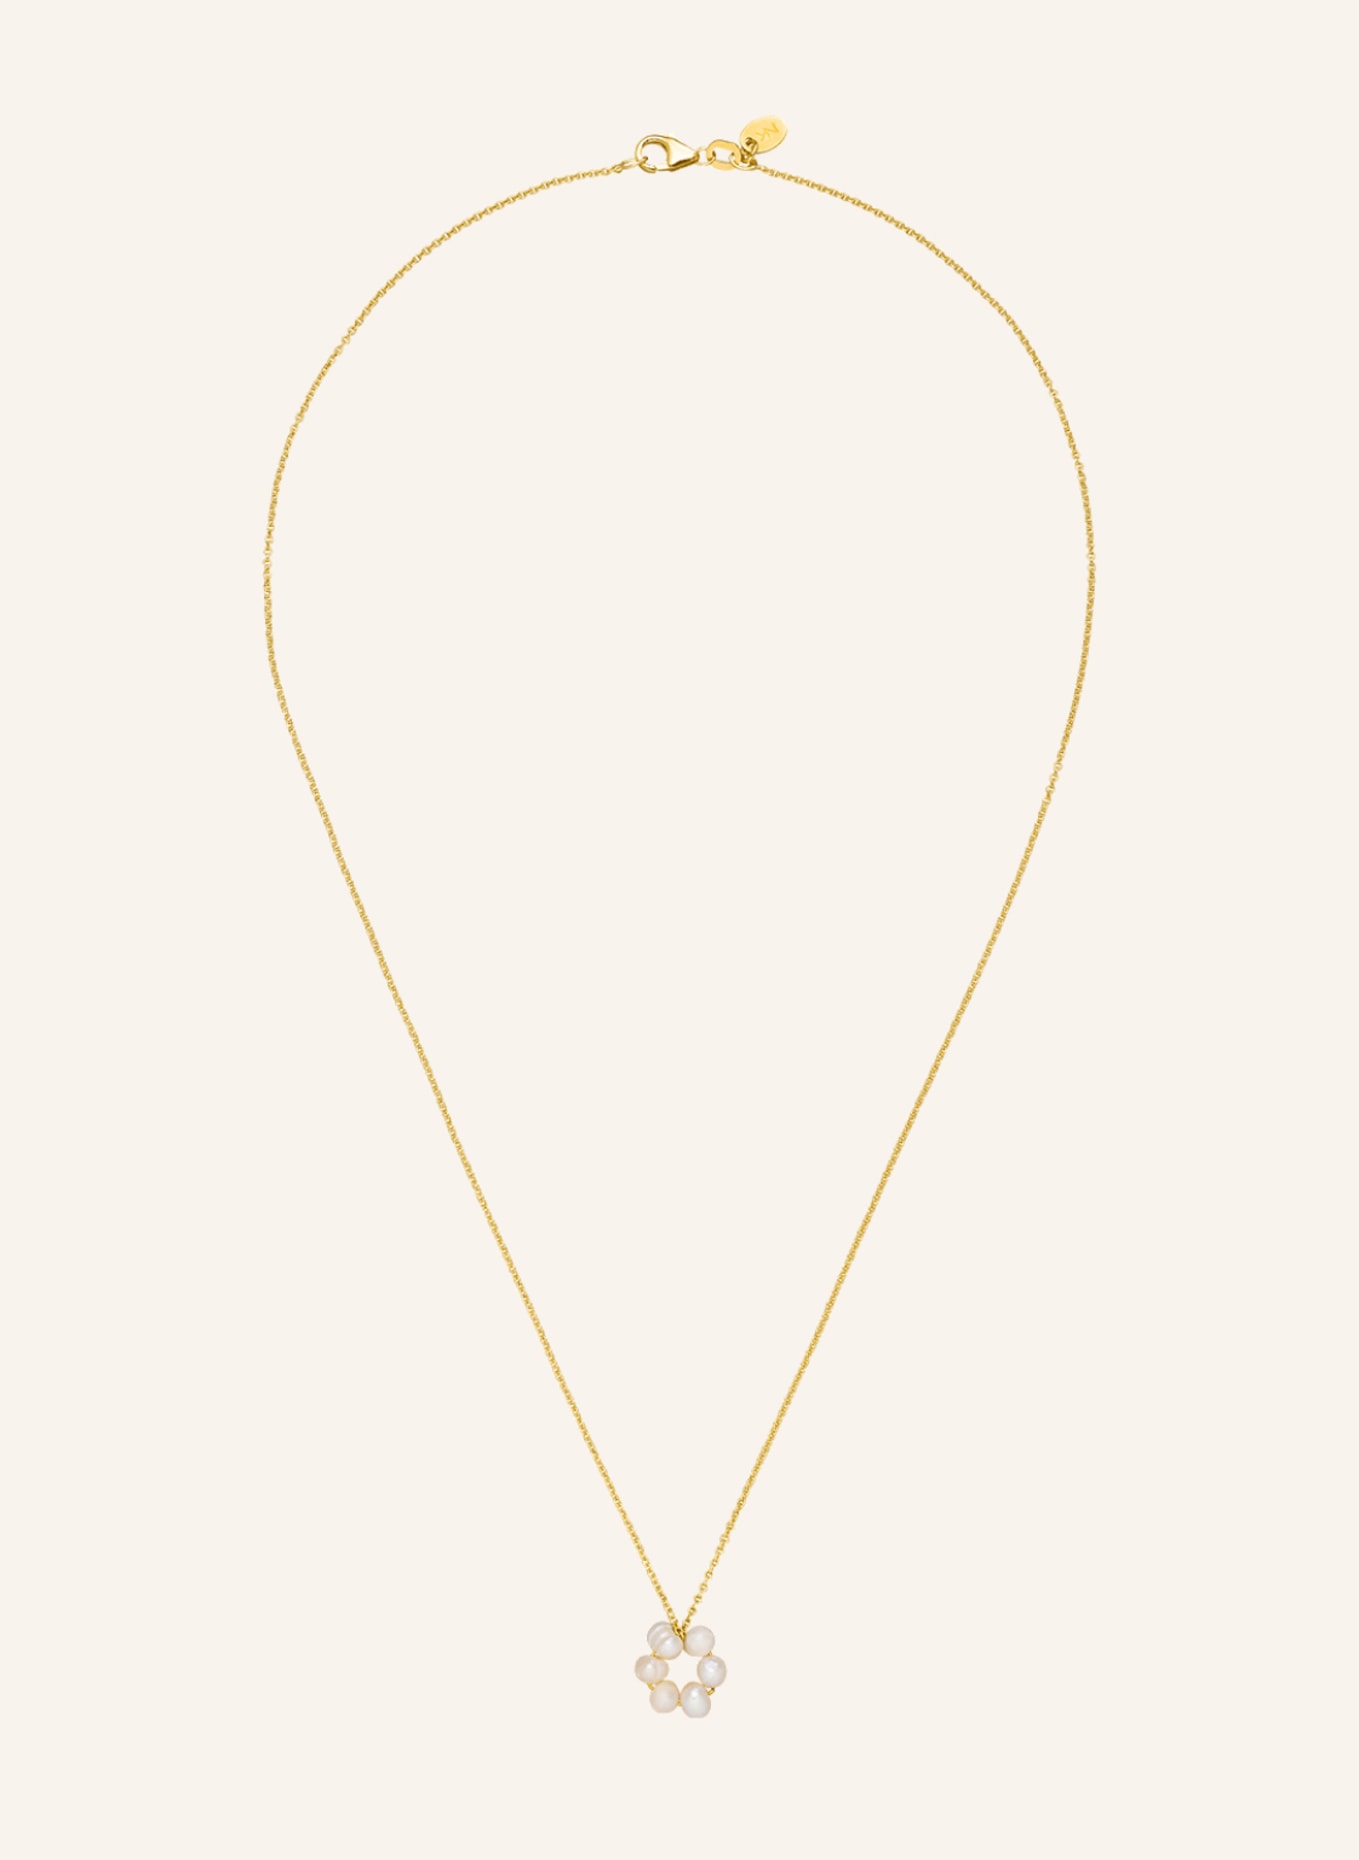 NINA KASTENS Kette TINY PEARL NECKLACE by GLAMBOU, Farbe: GOLD (Bild 1)